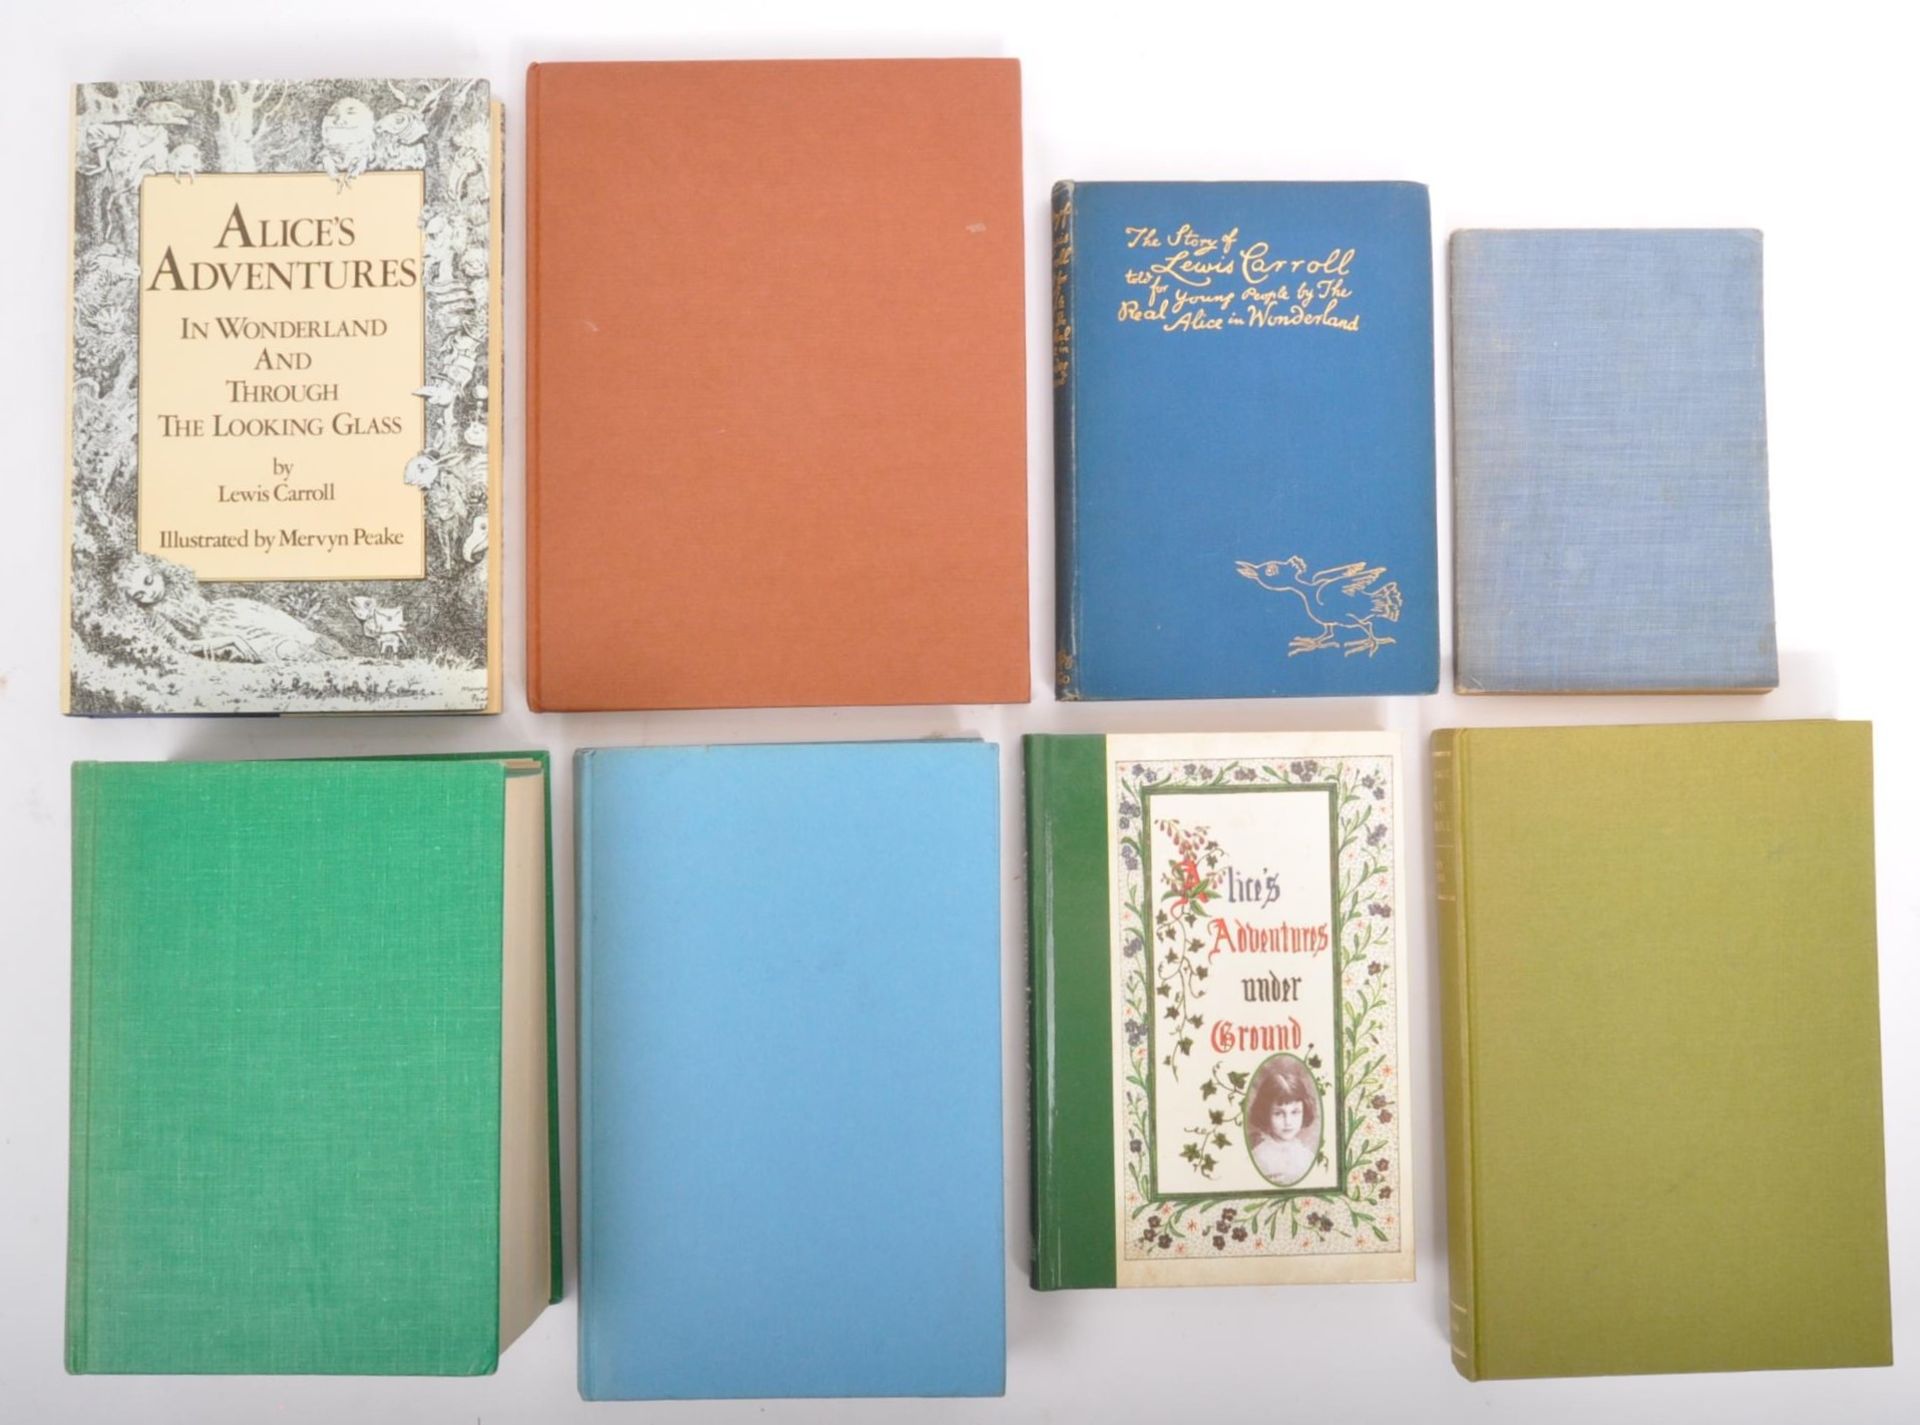 COLLECTION OF 20TH CENTURY LEWIS CARROLL BOOKS